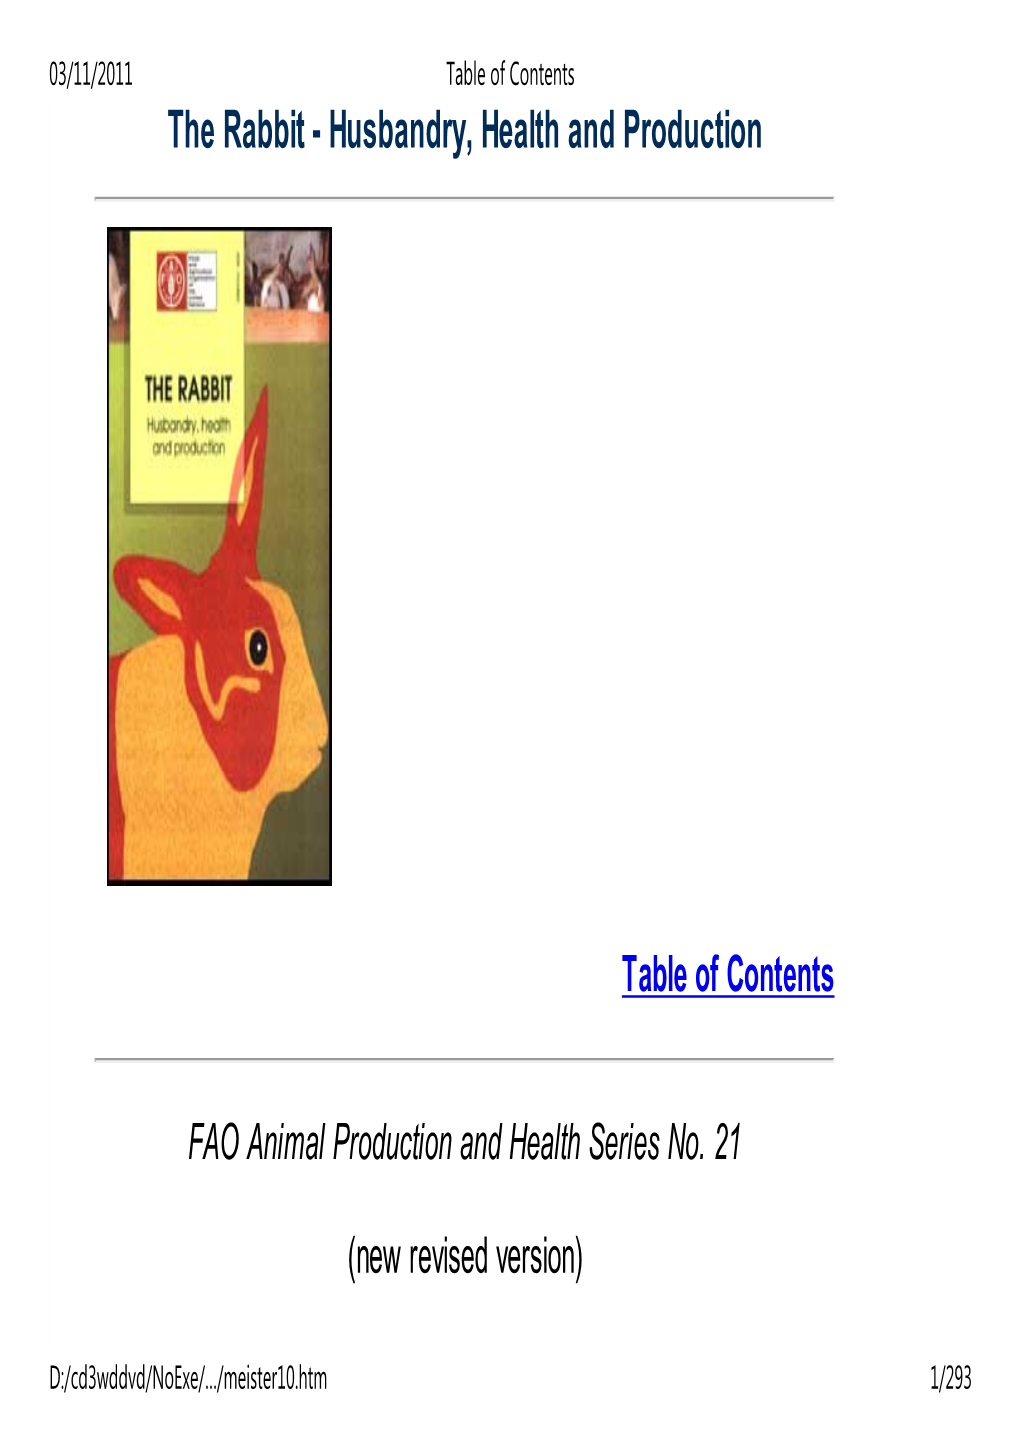 Table of Contents the Rabbit - Husbandry, Health and Production